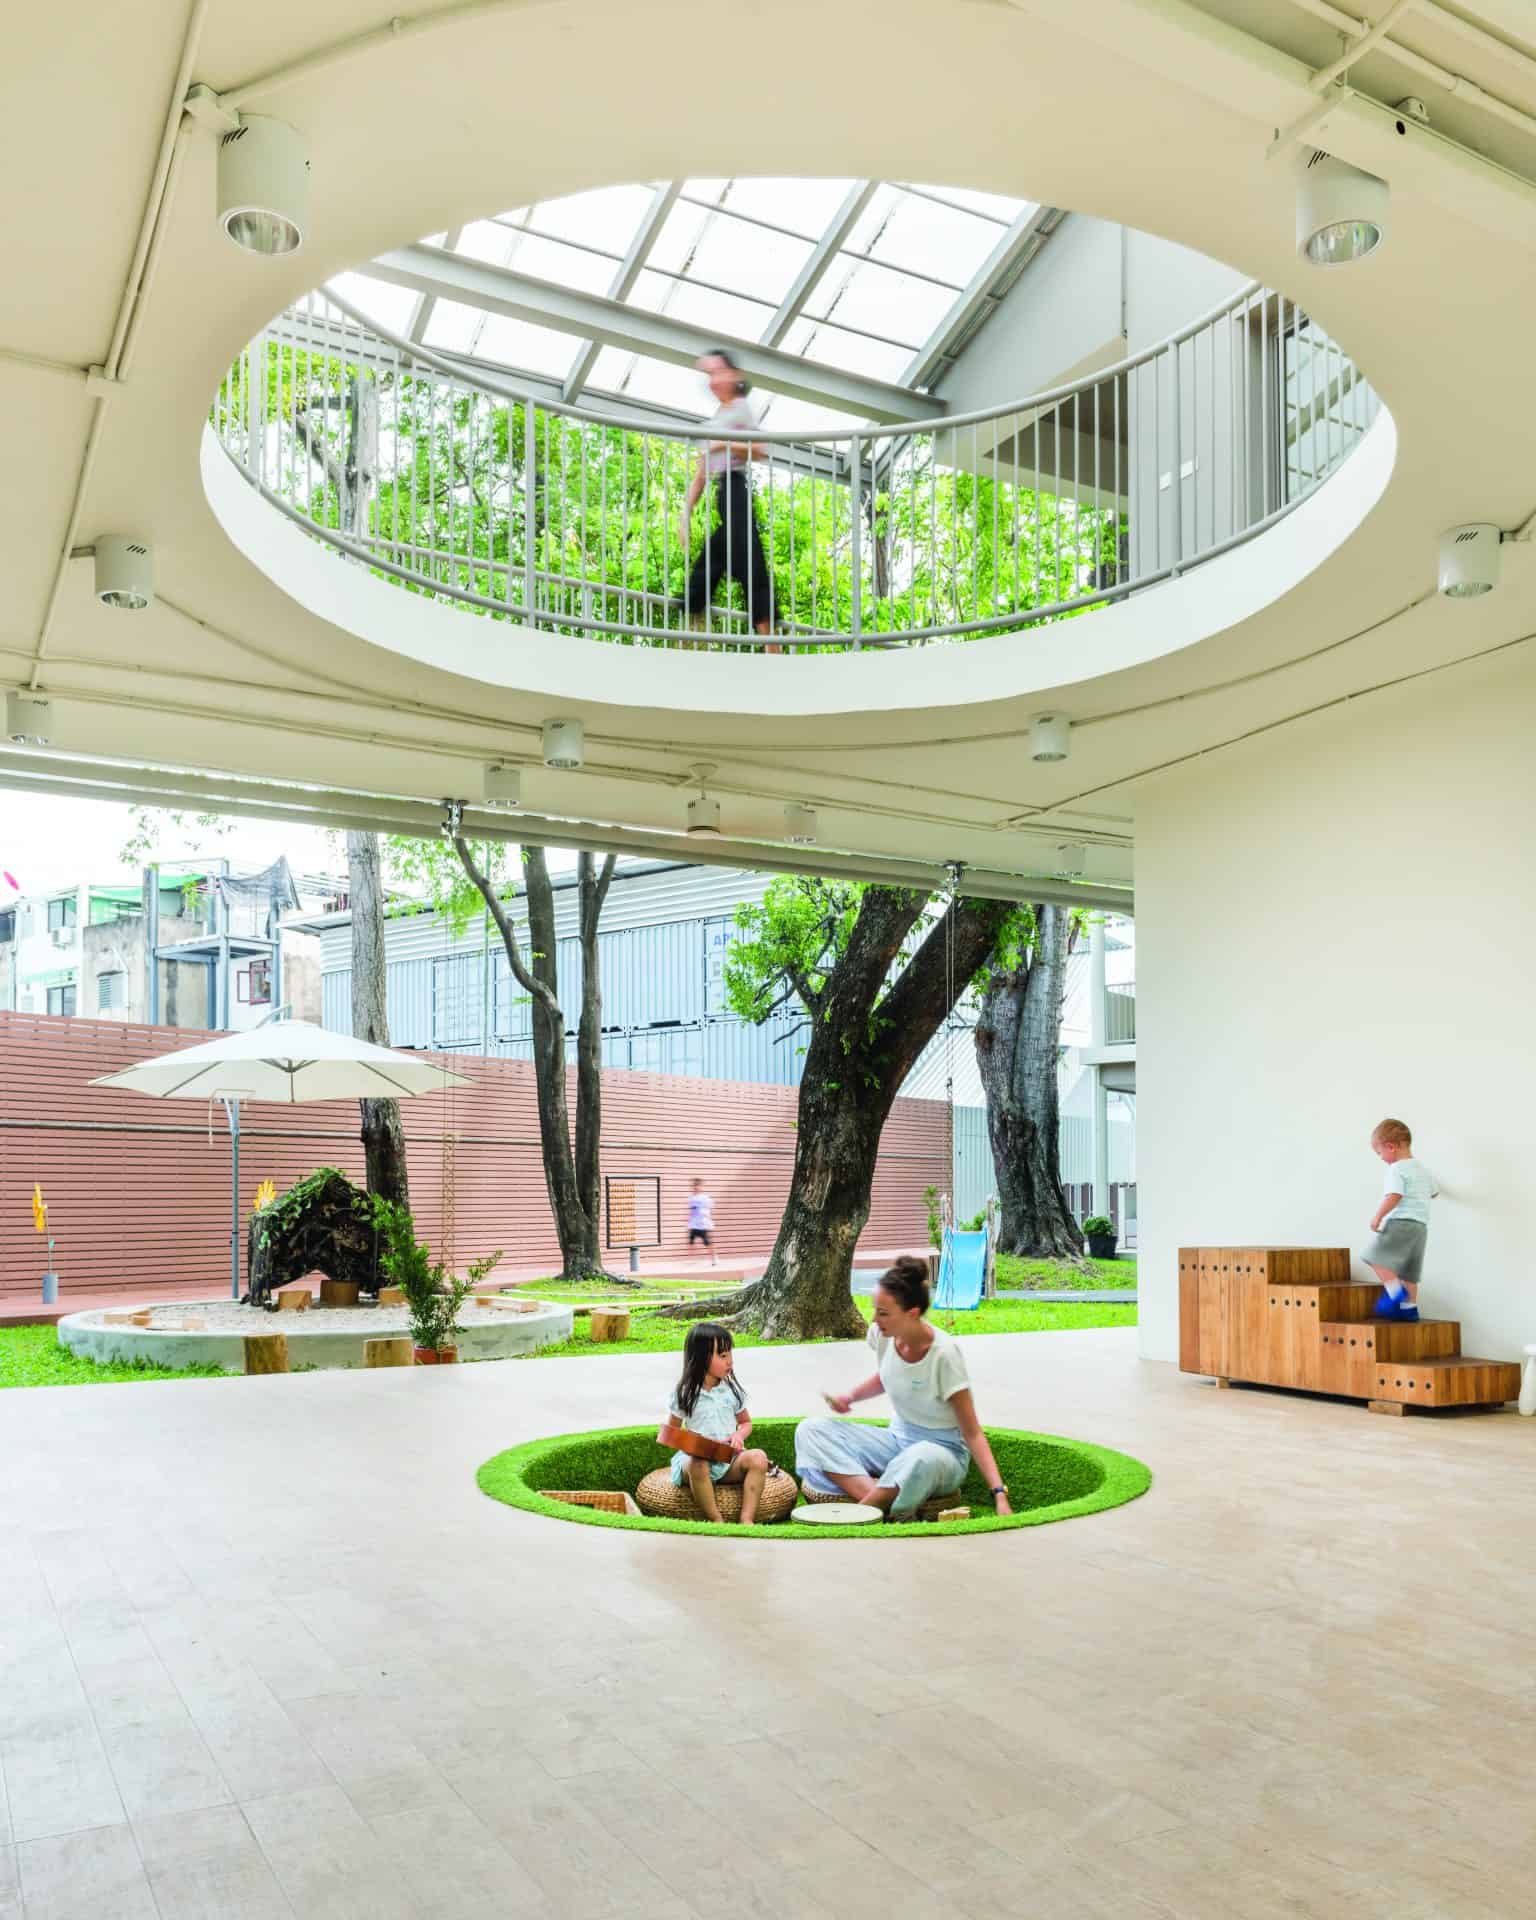  An architecture that allows children to play outside….